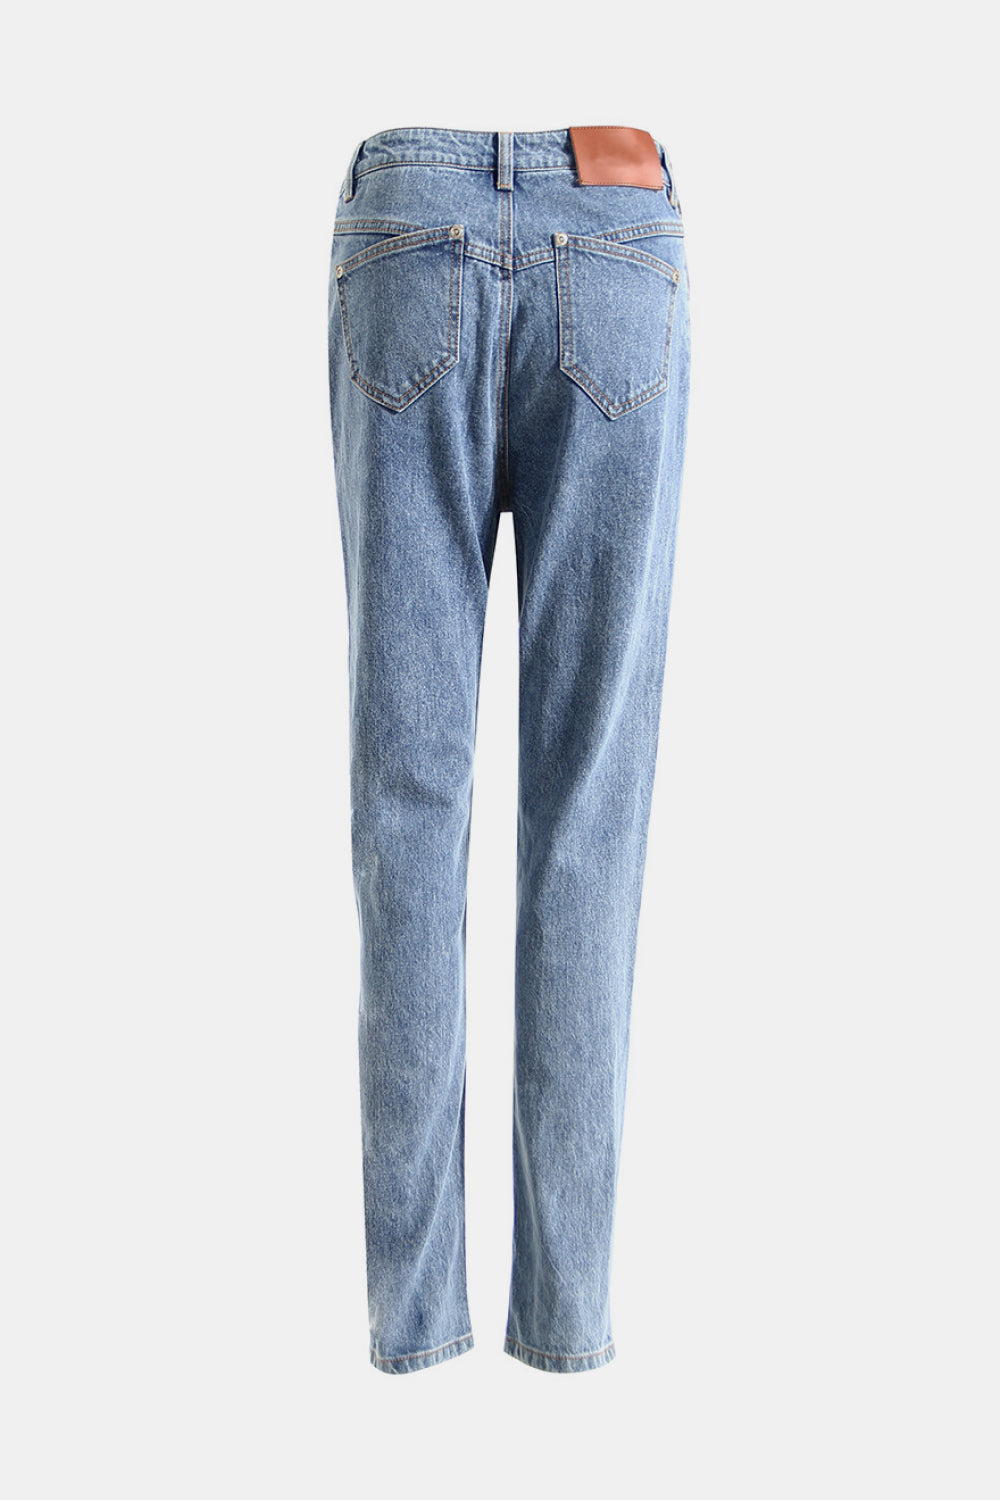 Buttoned Zipper Ankle Jeans with Pockets